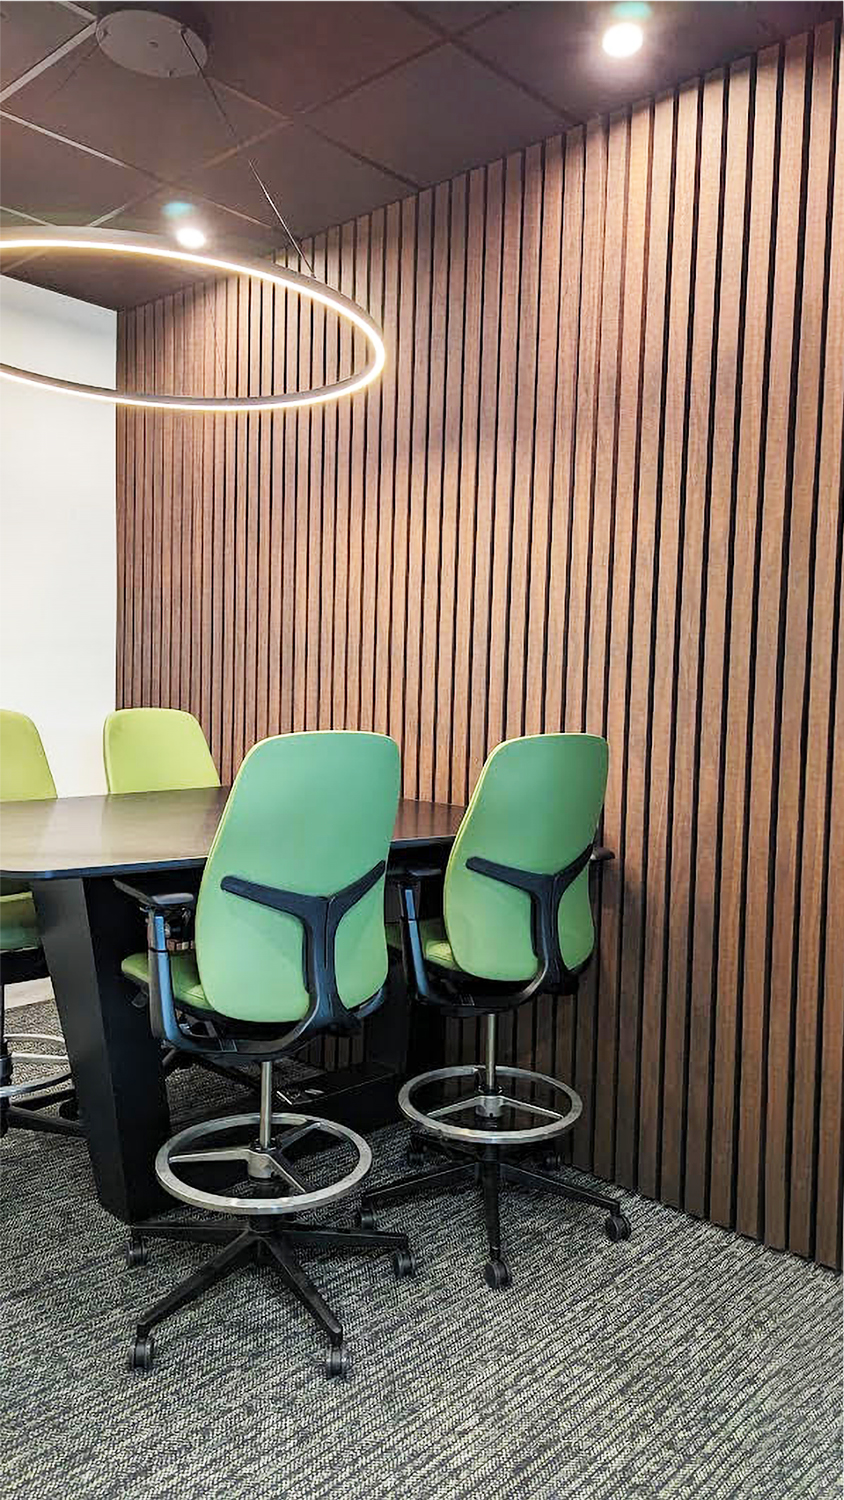 Acoustic Design Inspiration | Acoustic Panels and Sound Masking Dallas TX